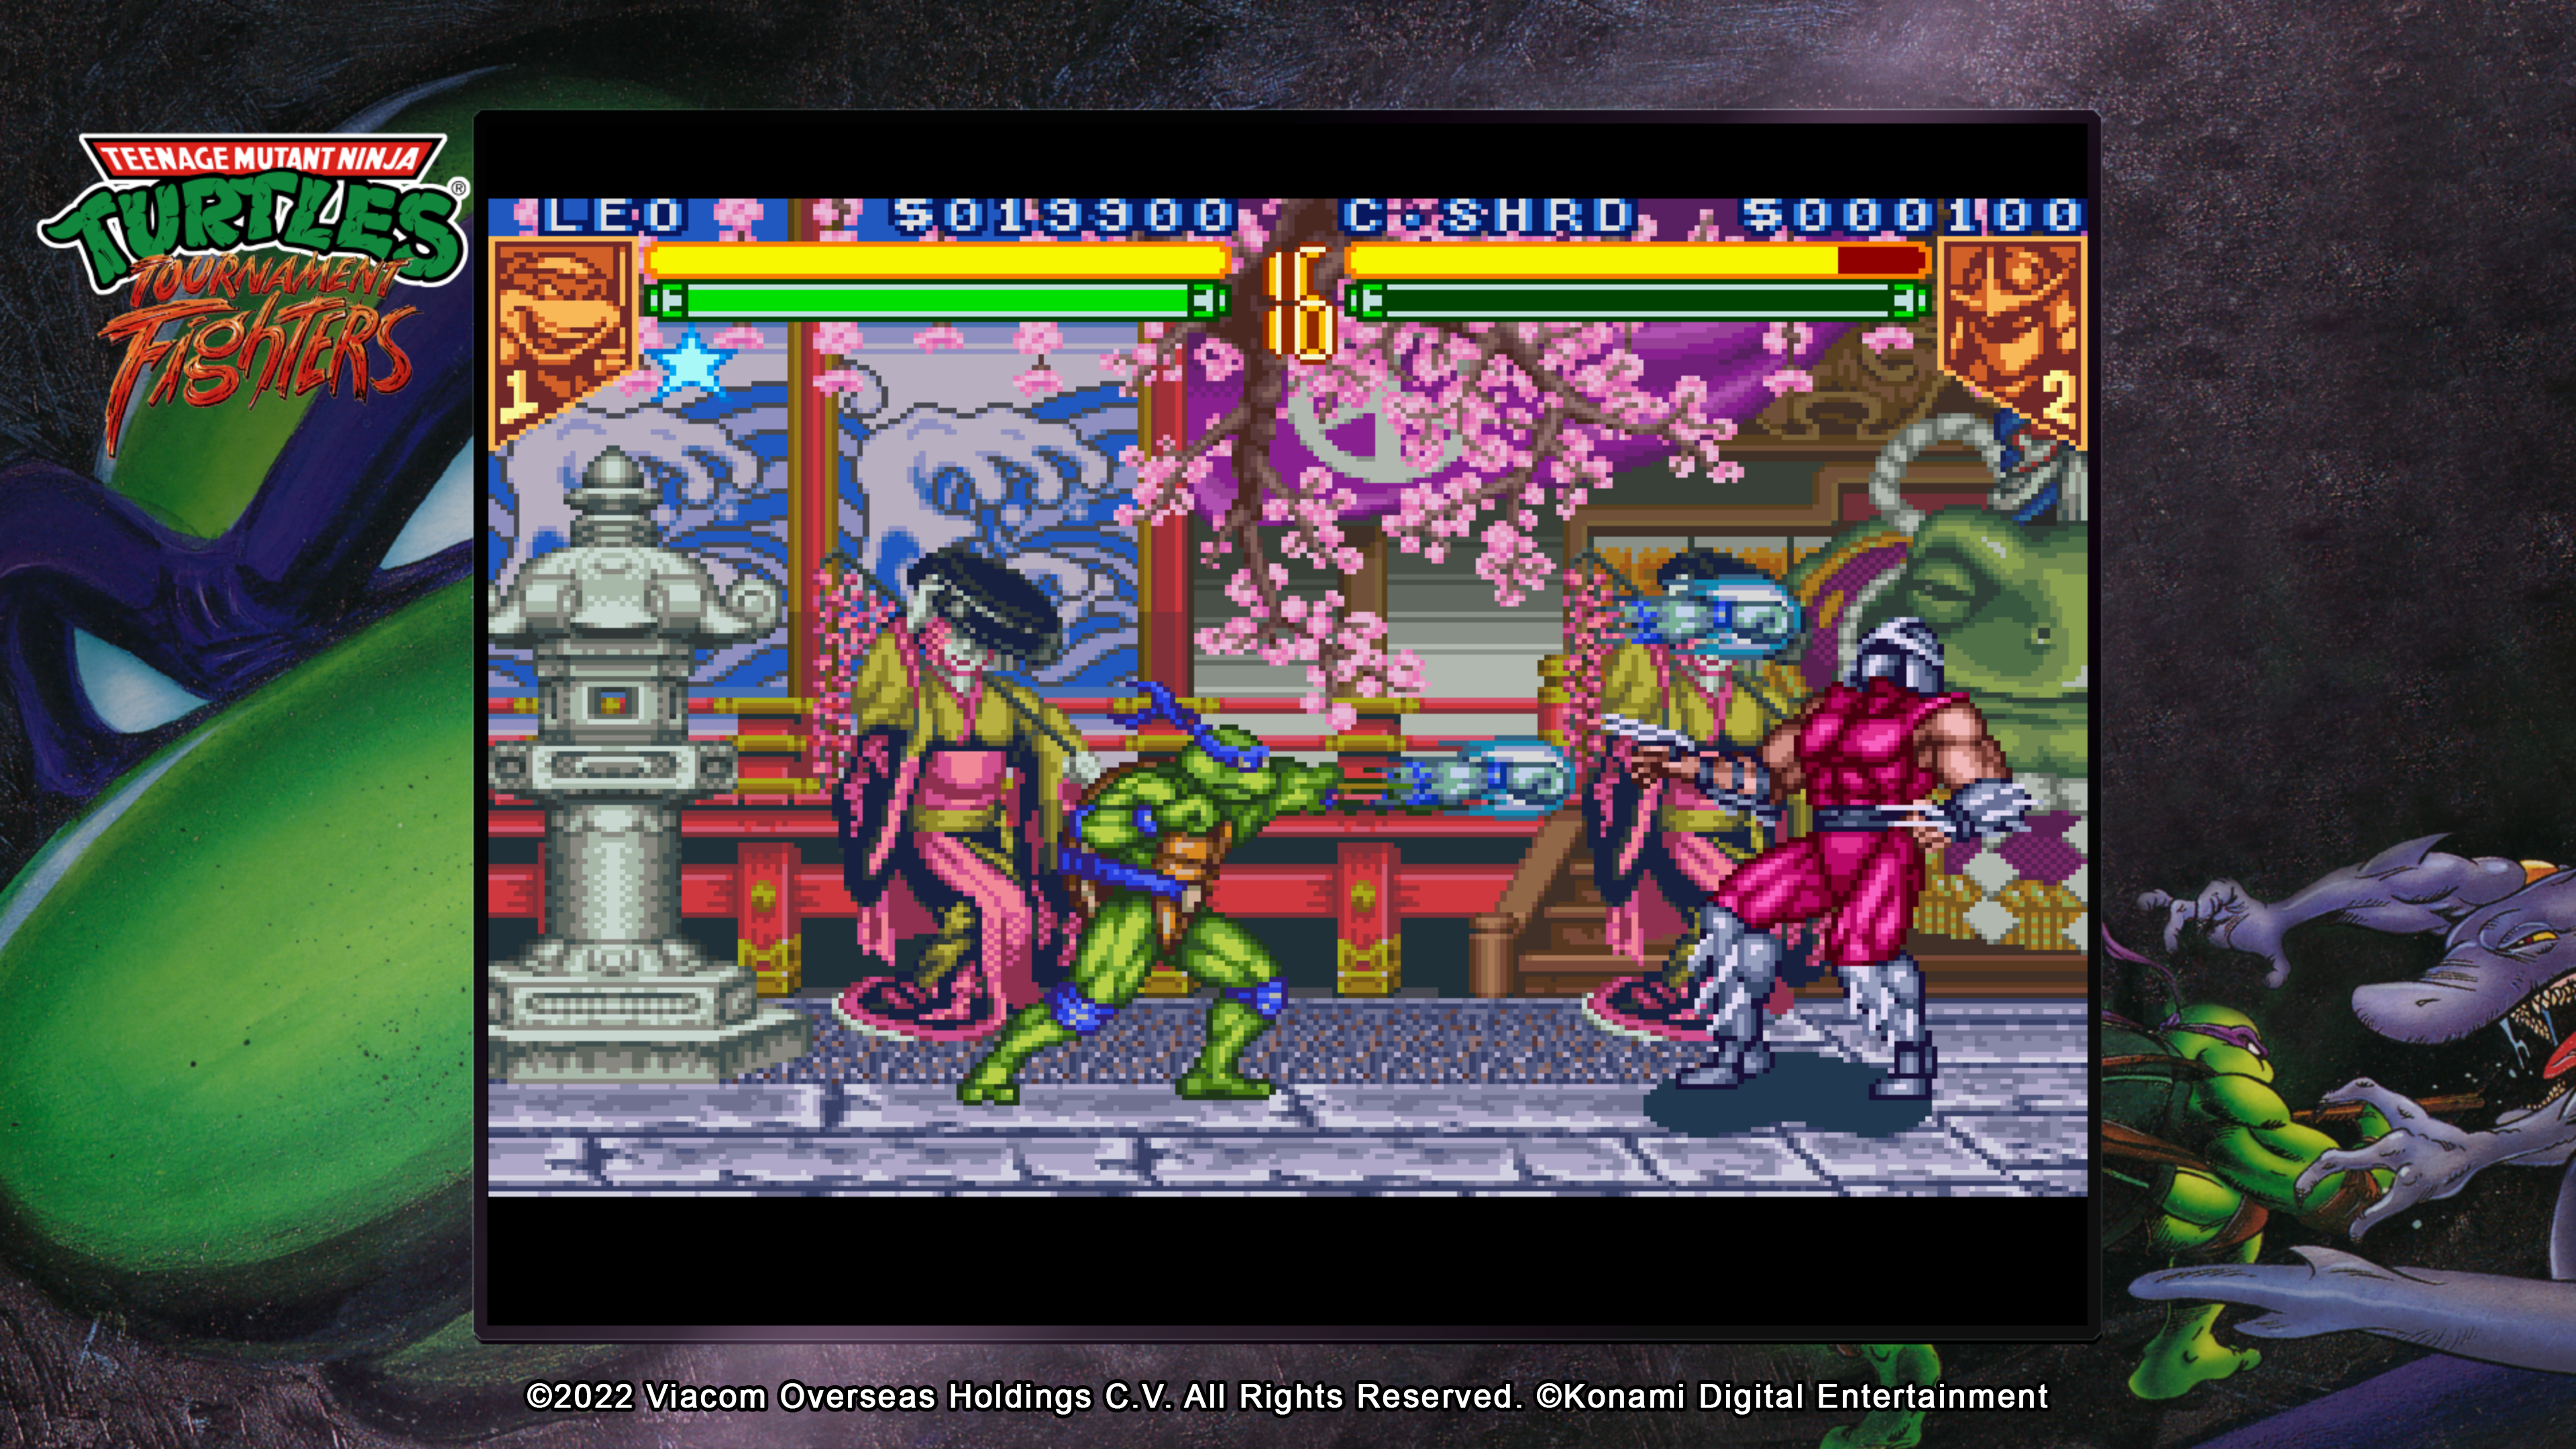 Teenage Mutant Ninja Turtles vs Street Fighter brings two icons of  nostalgia together this May